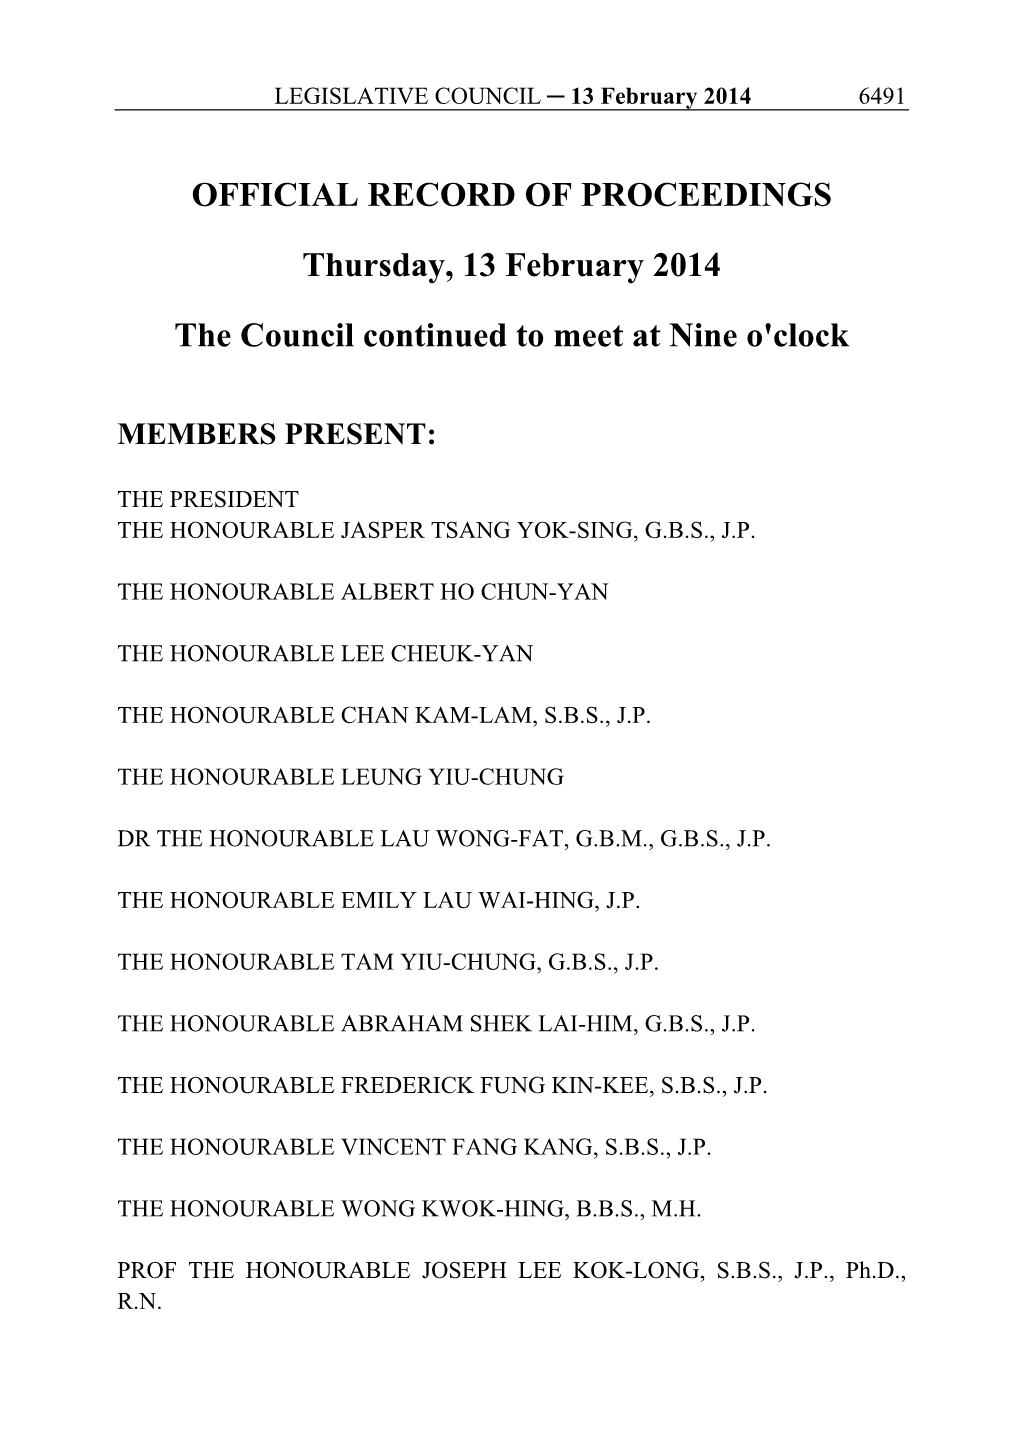 OFFICIAL RECORD of PROCEEDINGS Thursday, 13